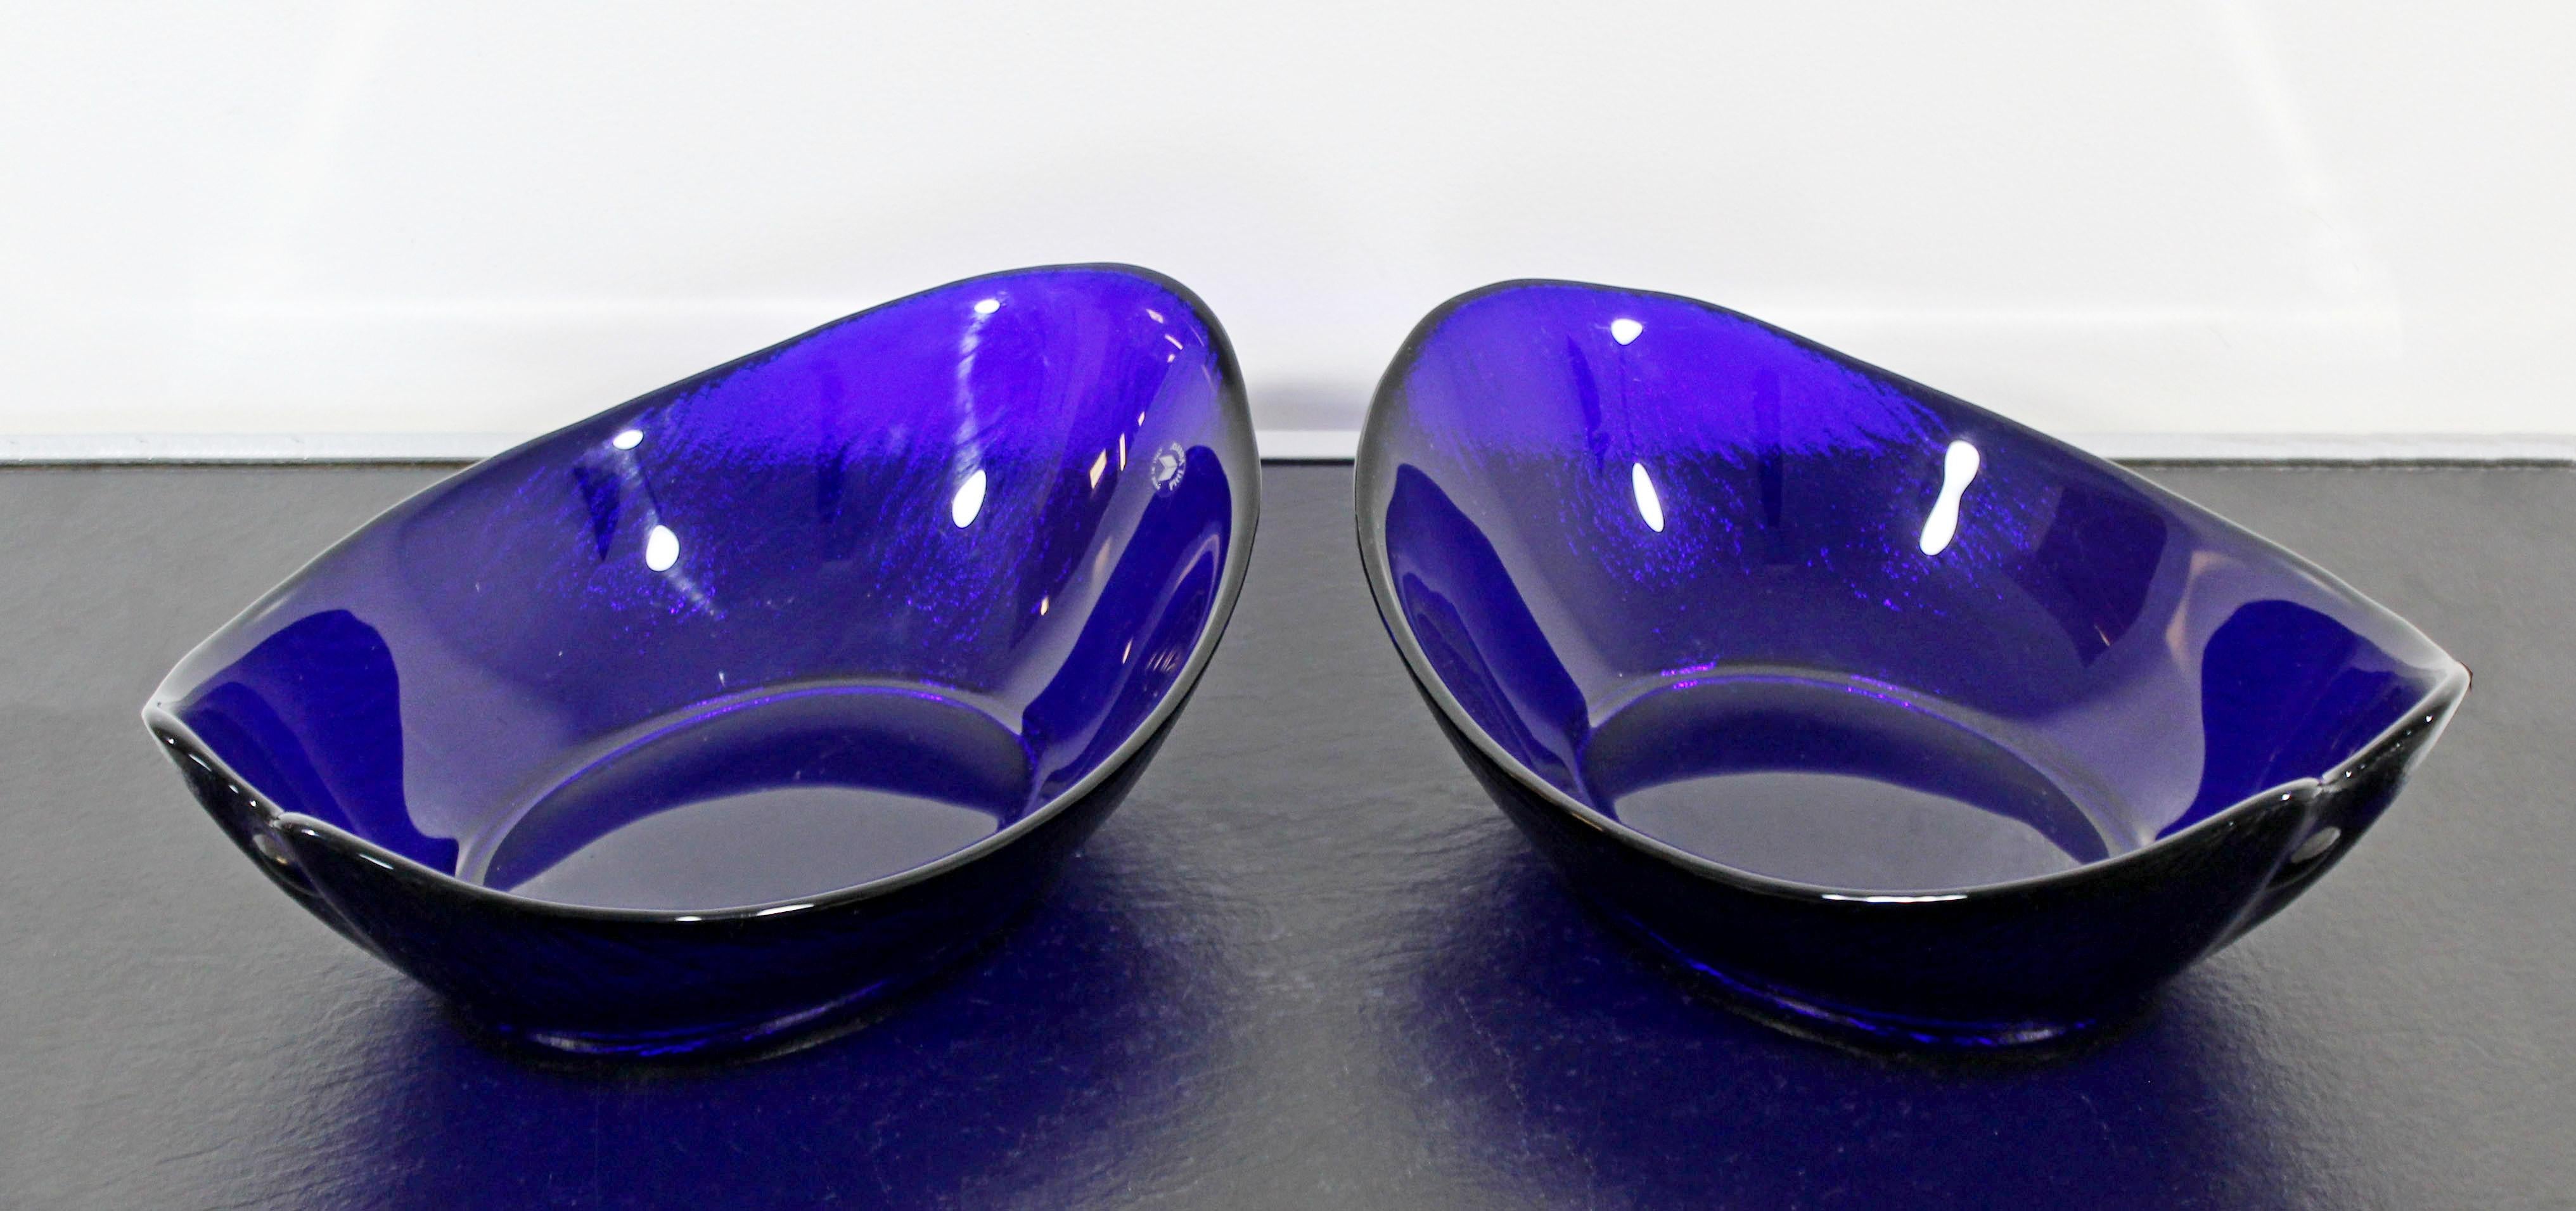 For your consideration is a lovely pair of blue, Murano, hand blown glass art bowls, by Pitti Vetro, circa 1970s. In excellent condition. The dimensions are 9